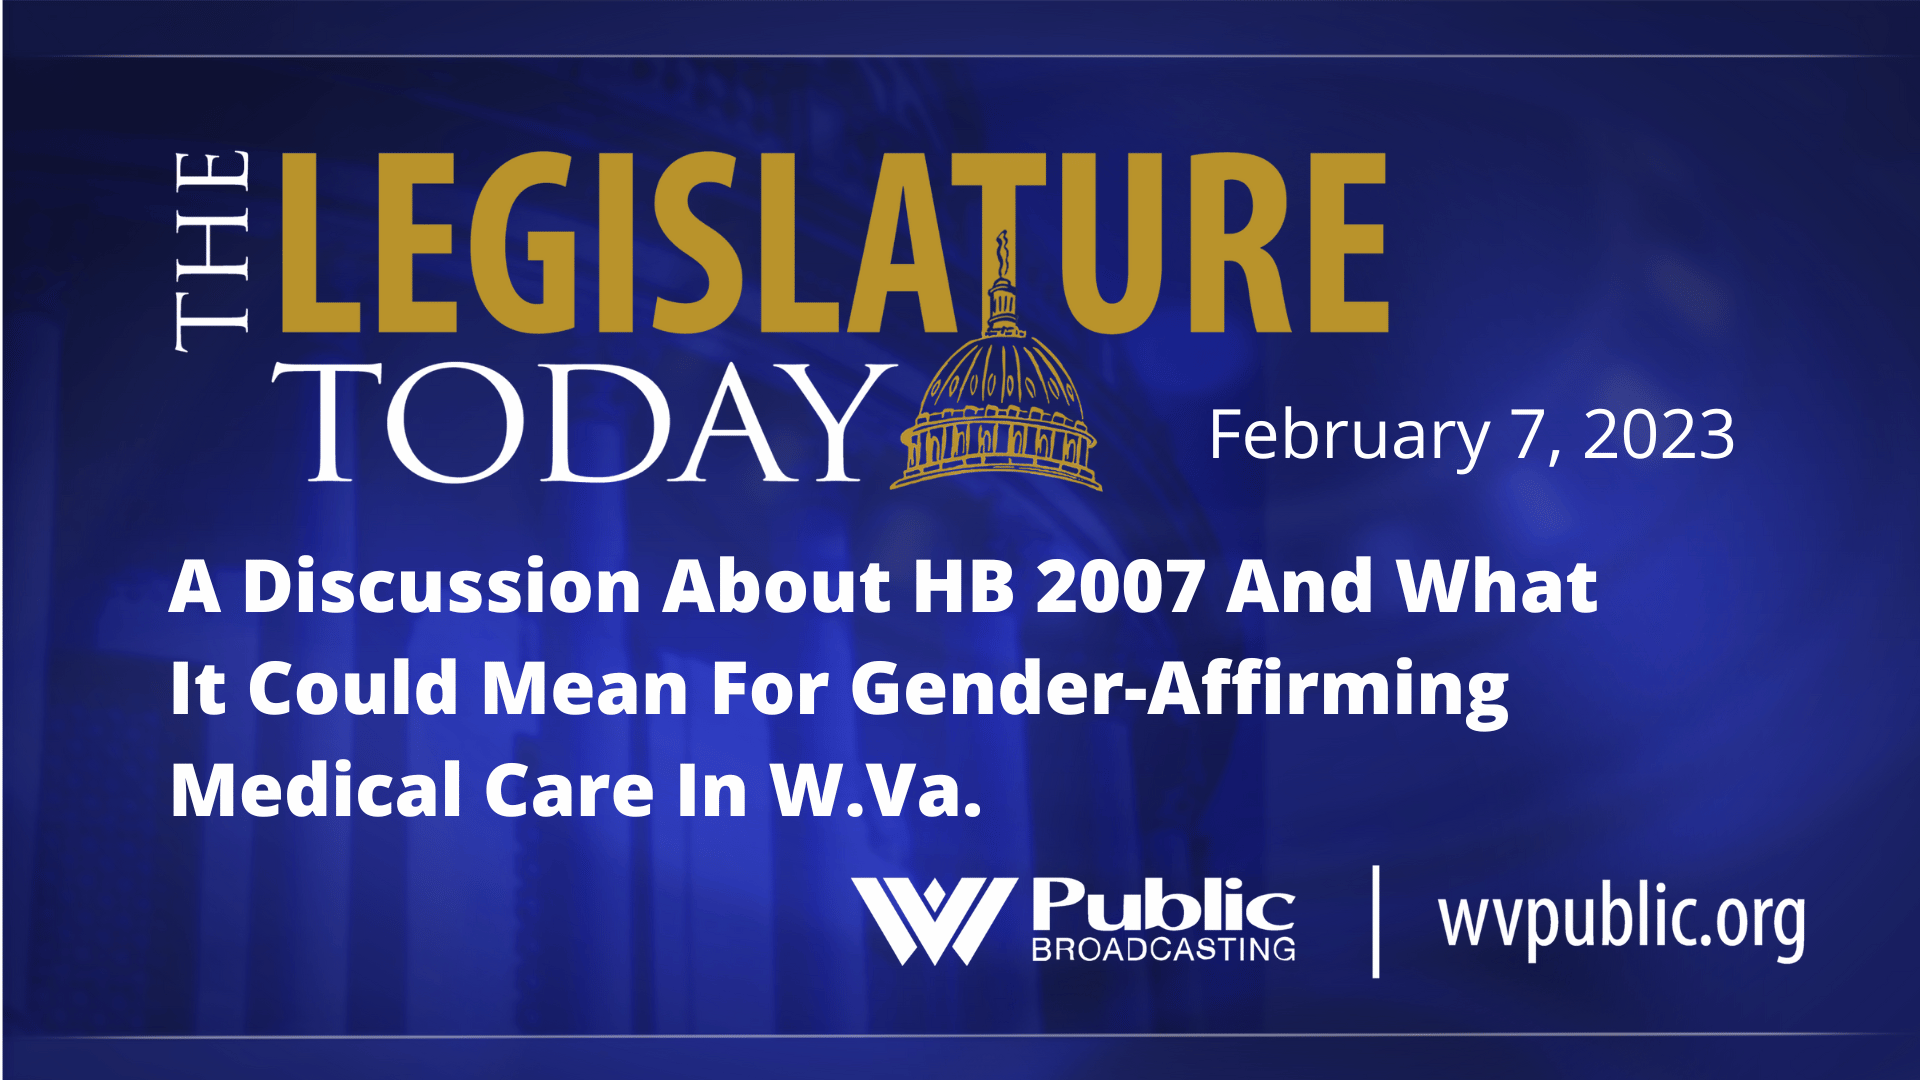 A Discussion About HB 2007 And What It Could Mean For Gender-Affirming Medical Care In W.Va.